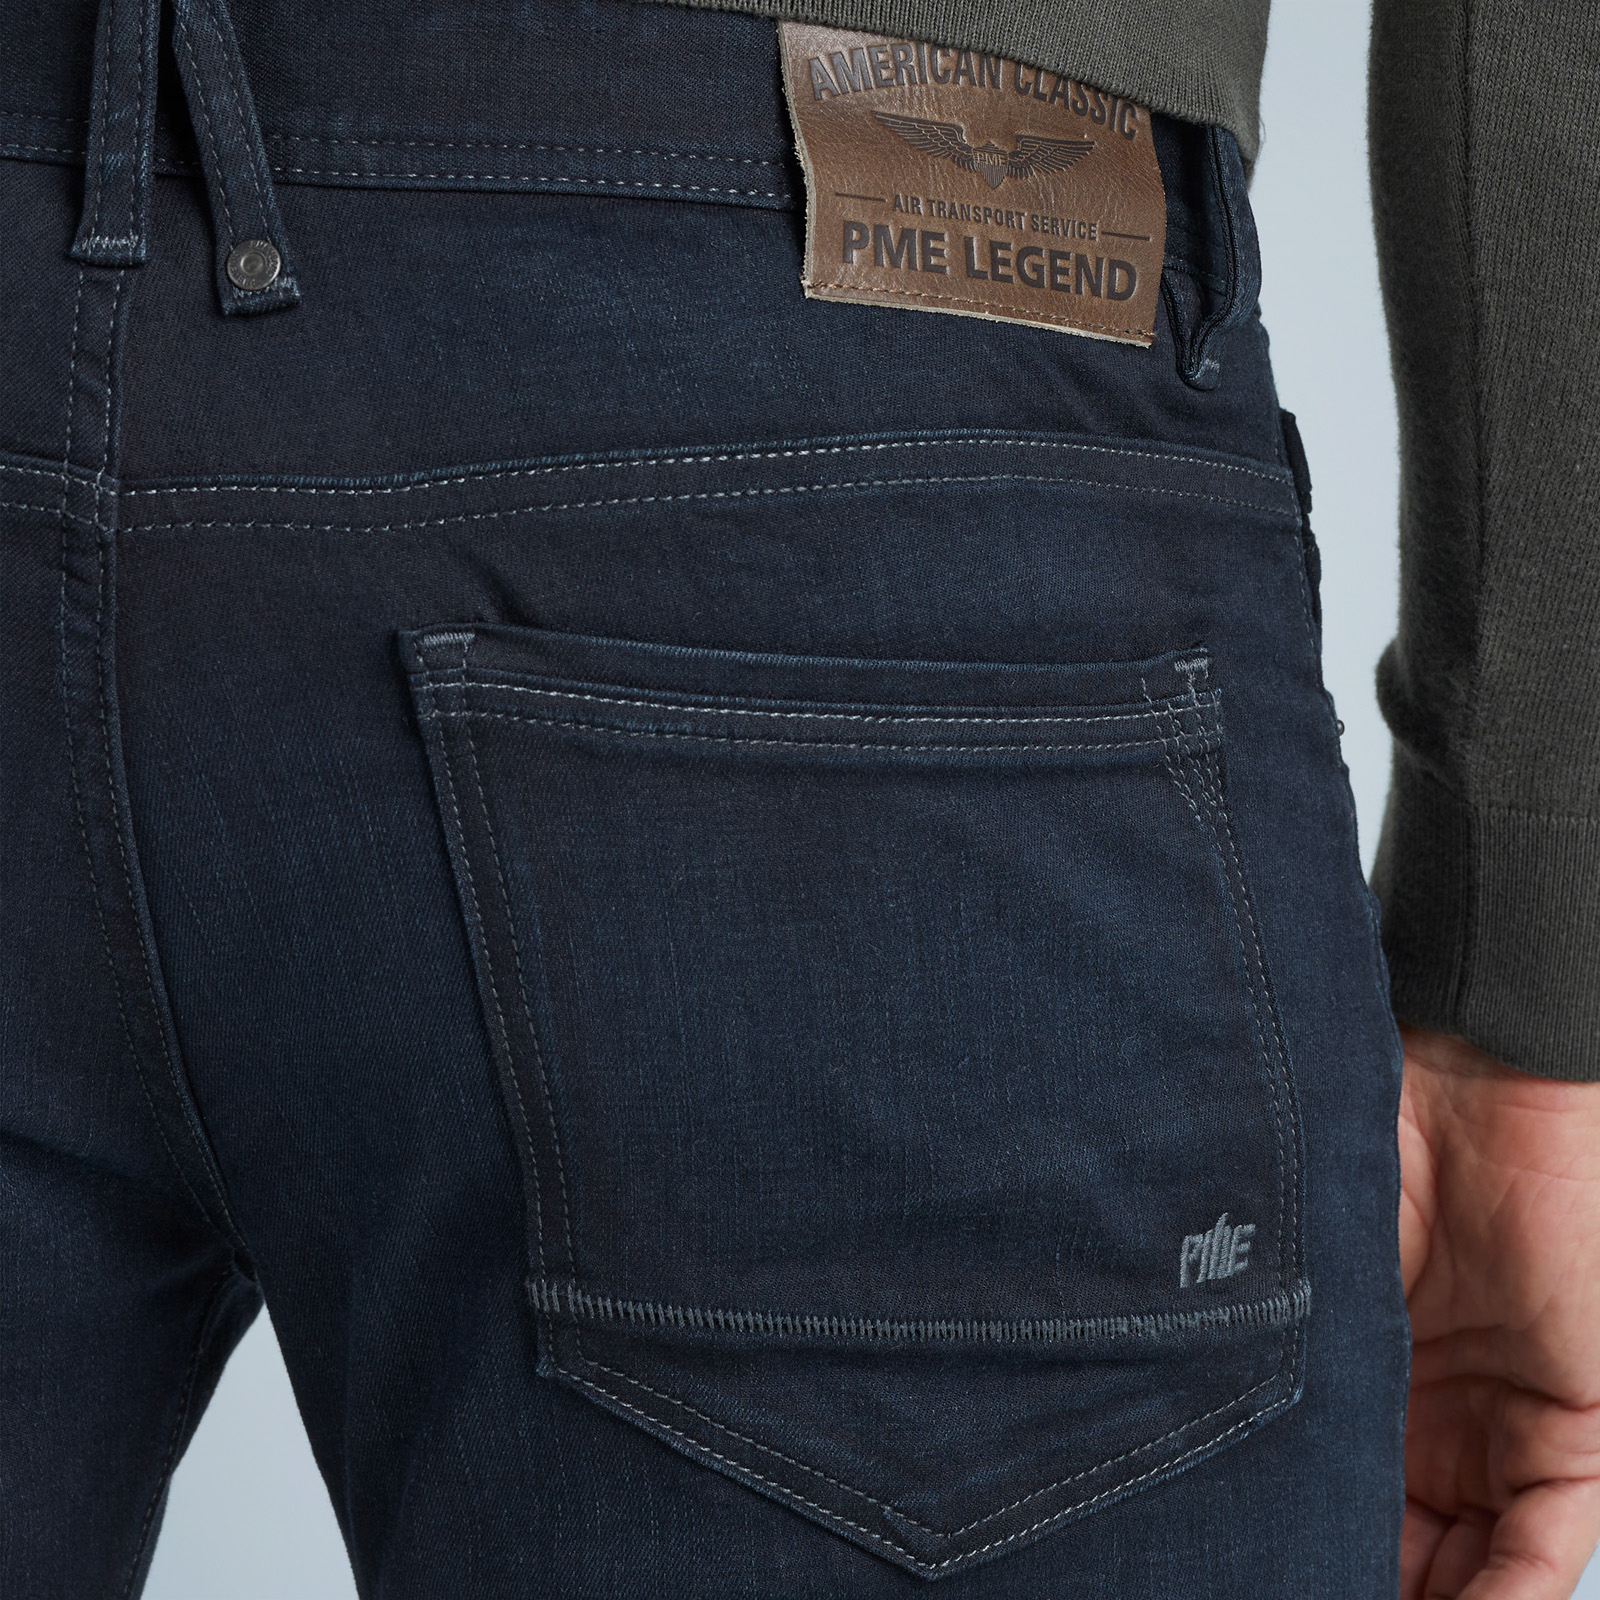 PME LEGEND returns Tailwheel fit | and Free jeans shipping | slim